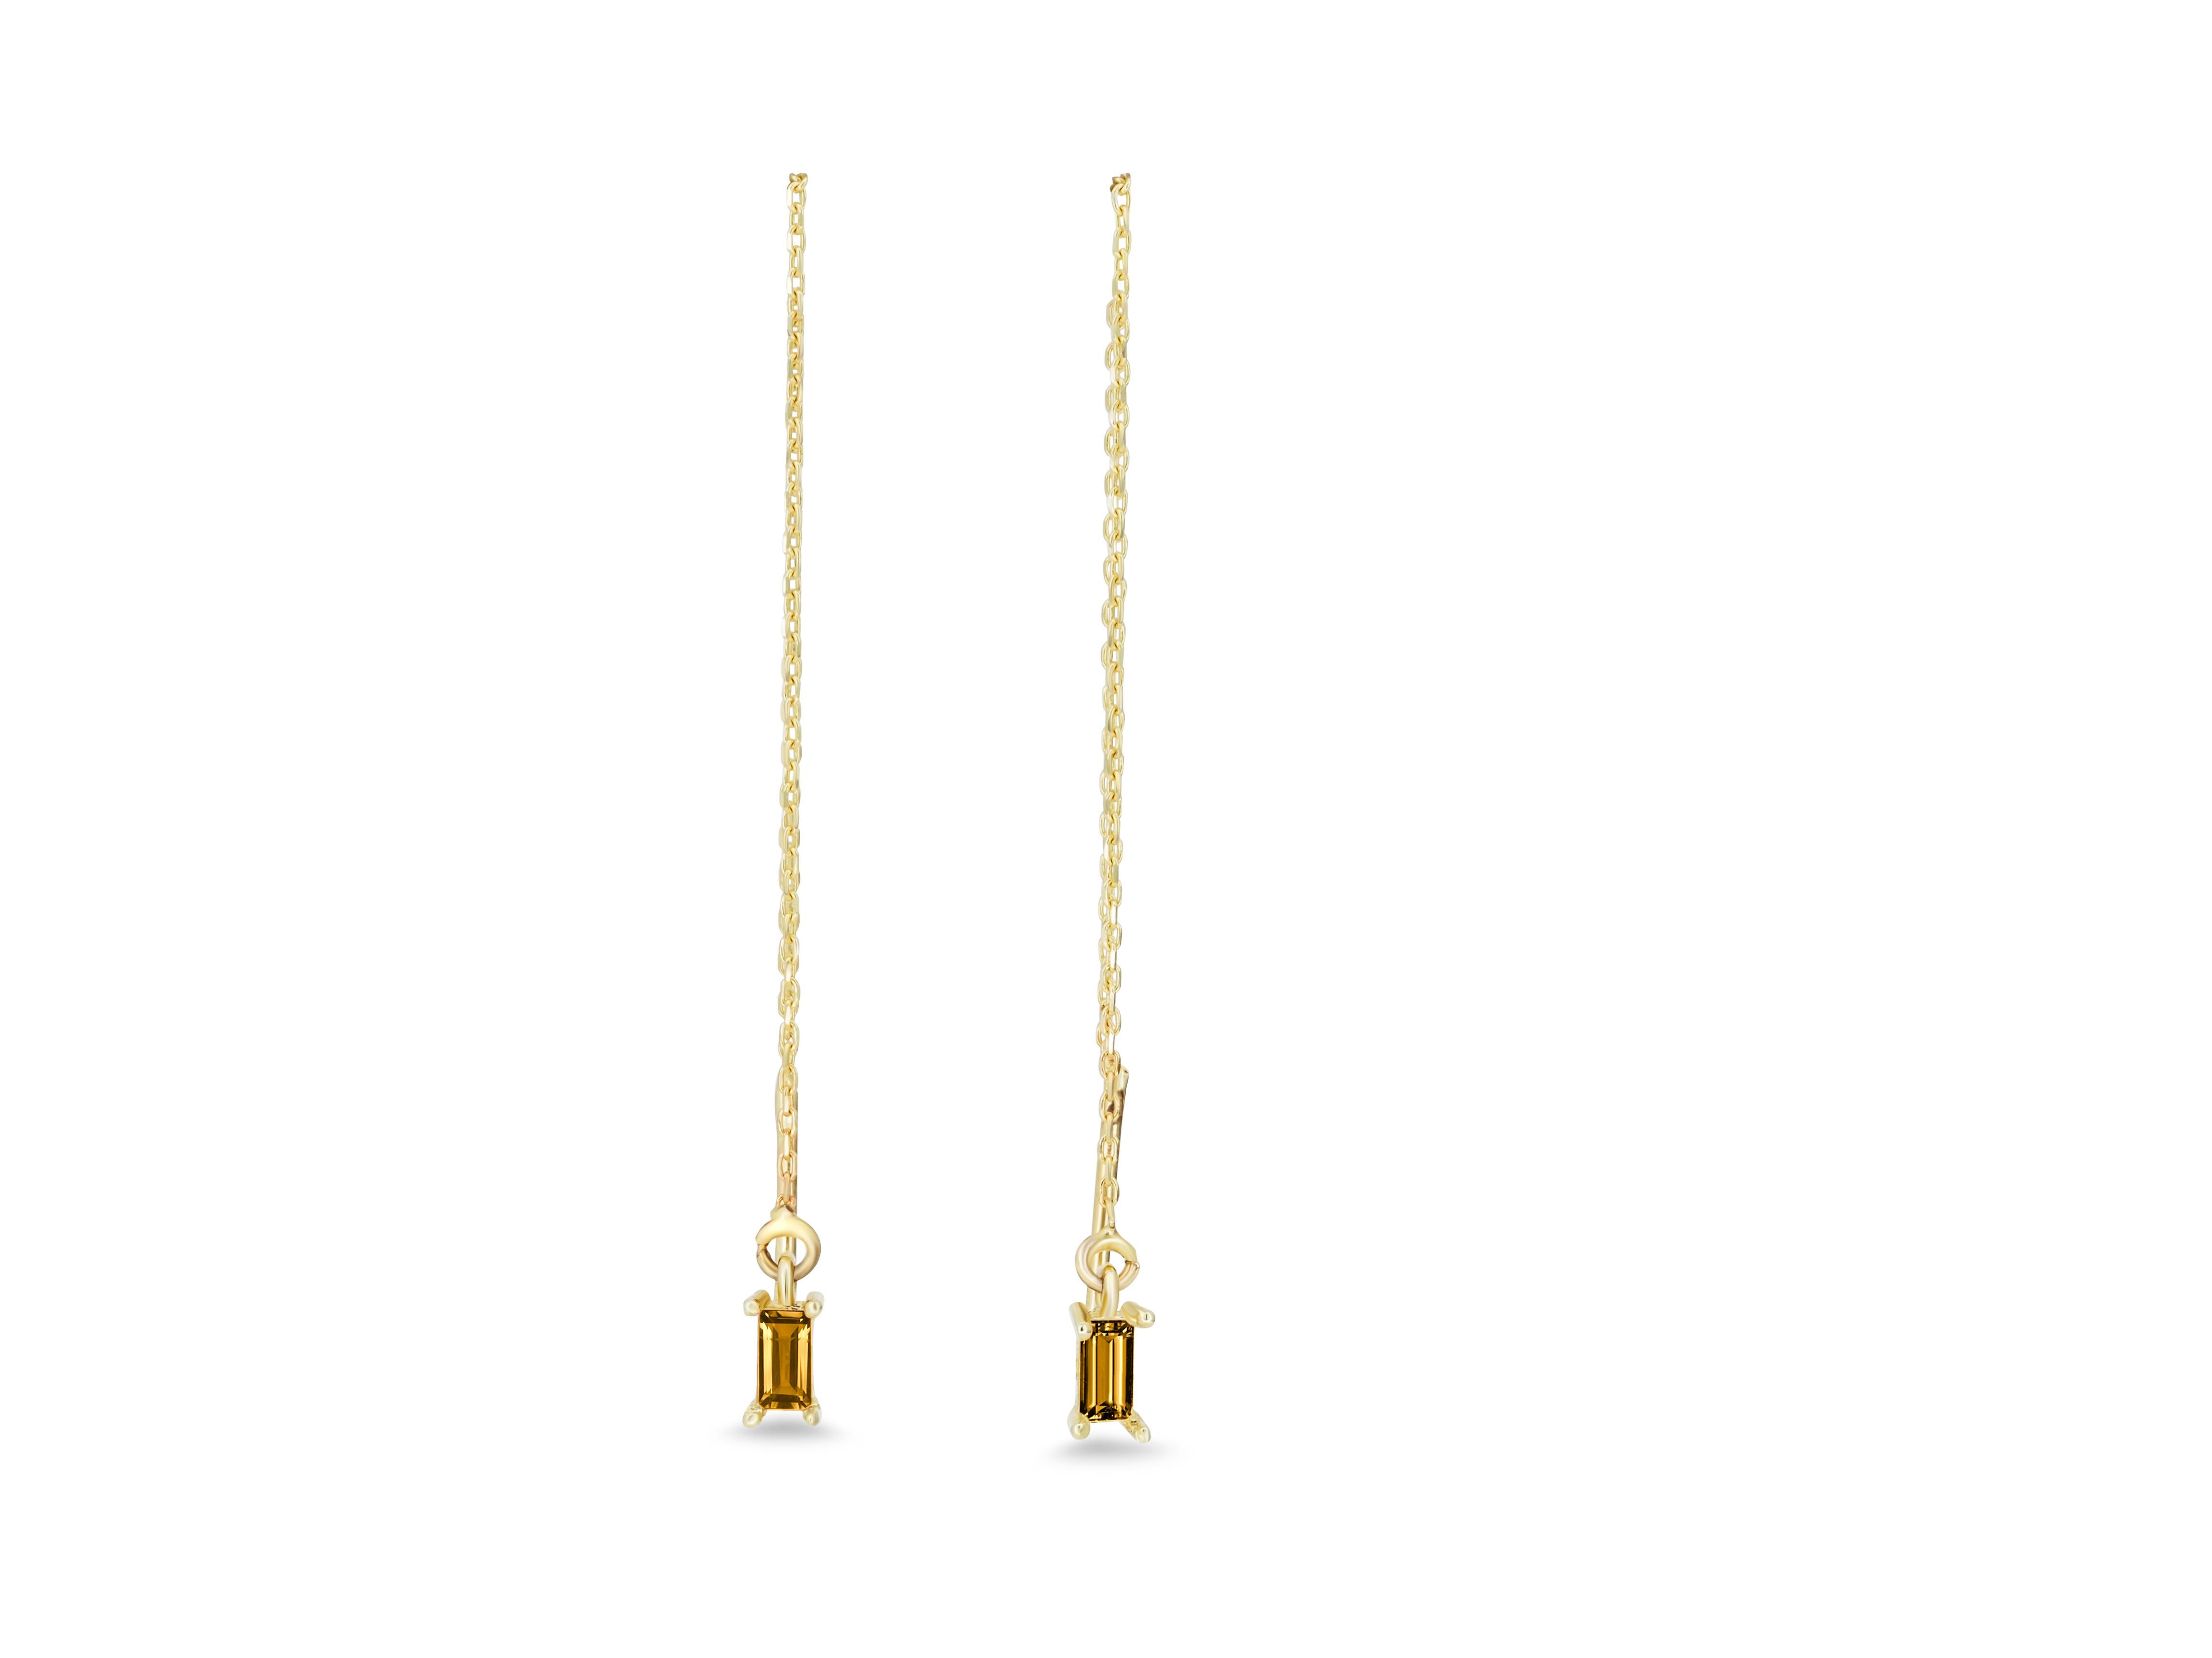 Baguette Cut 14k Solid Gold Drop Earrings with citrine.  For Sale